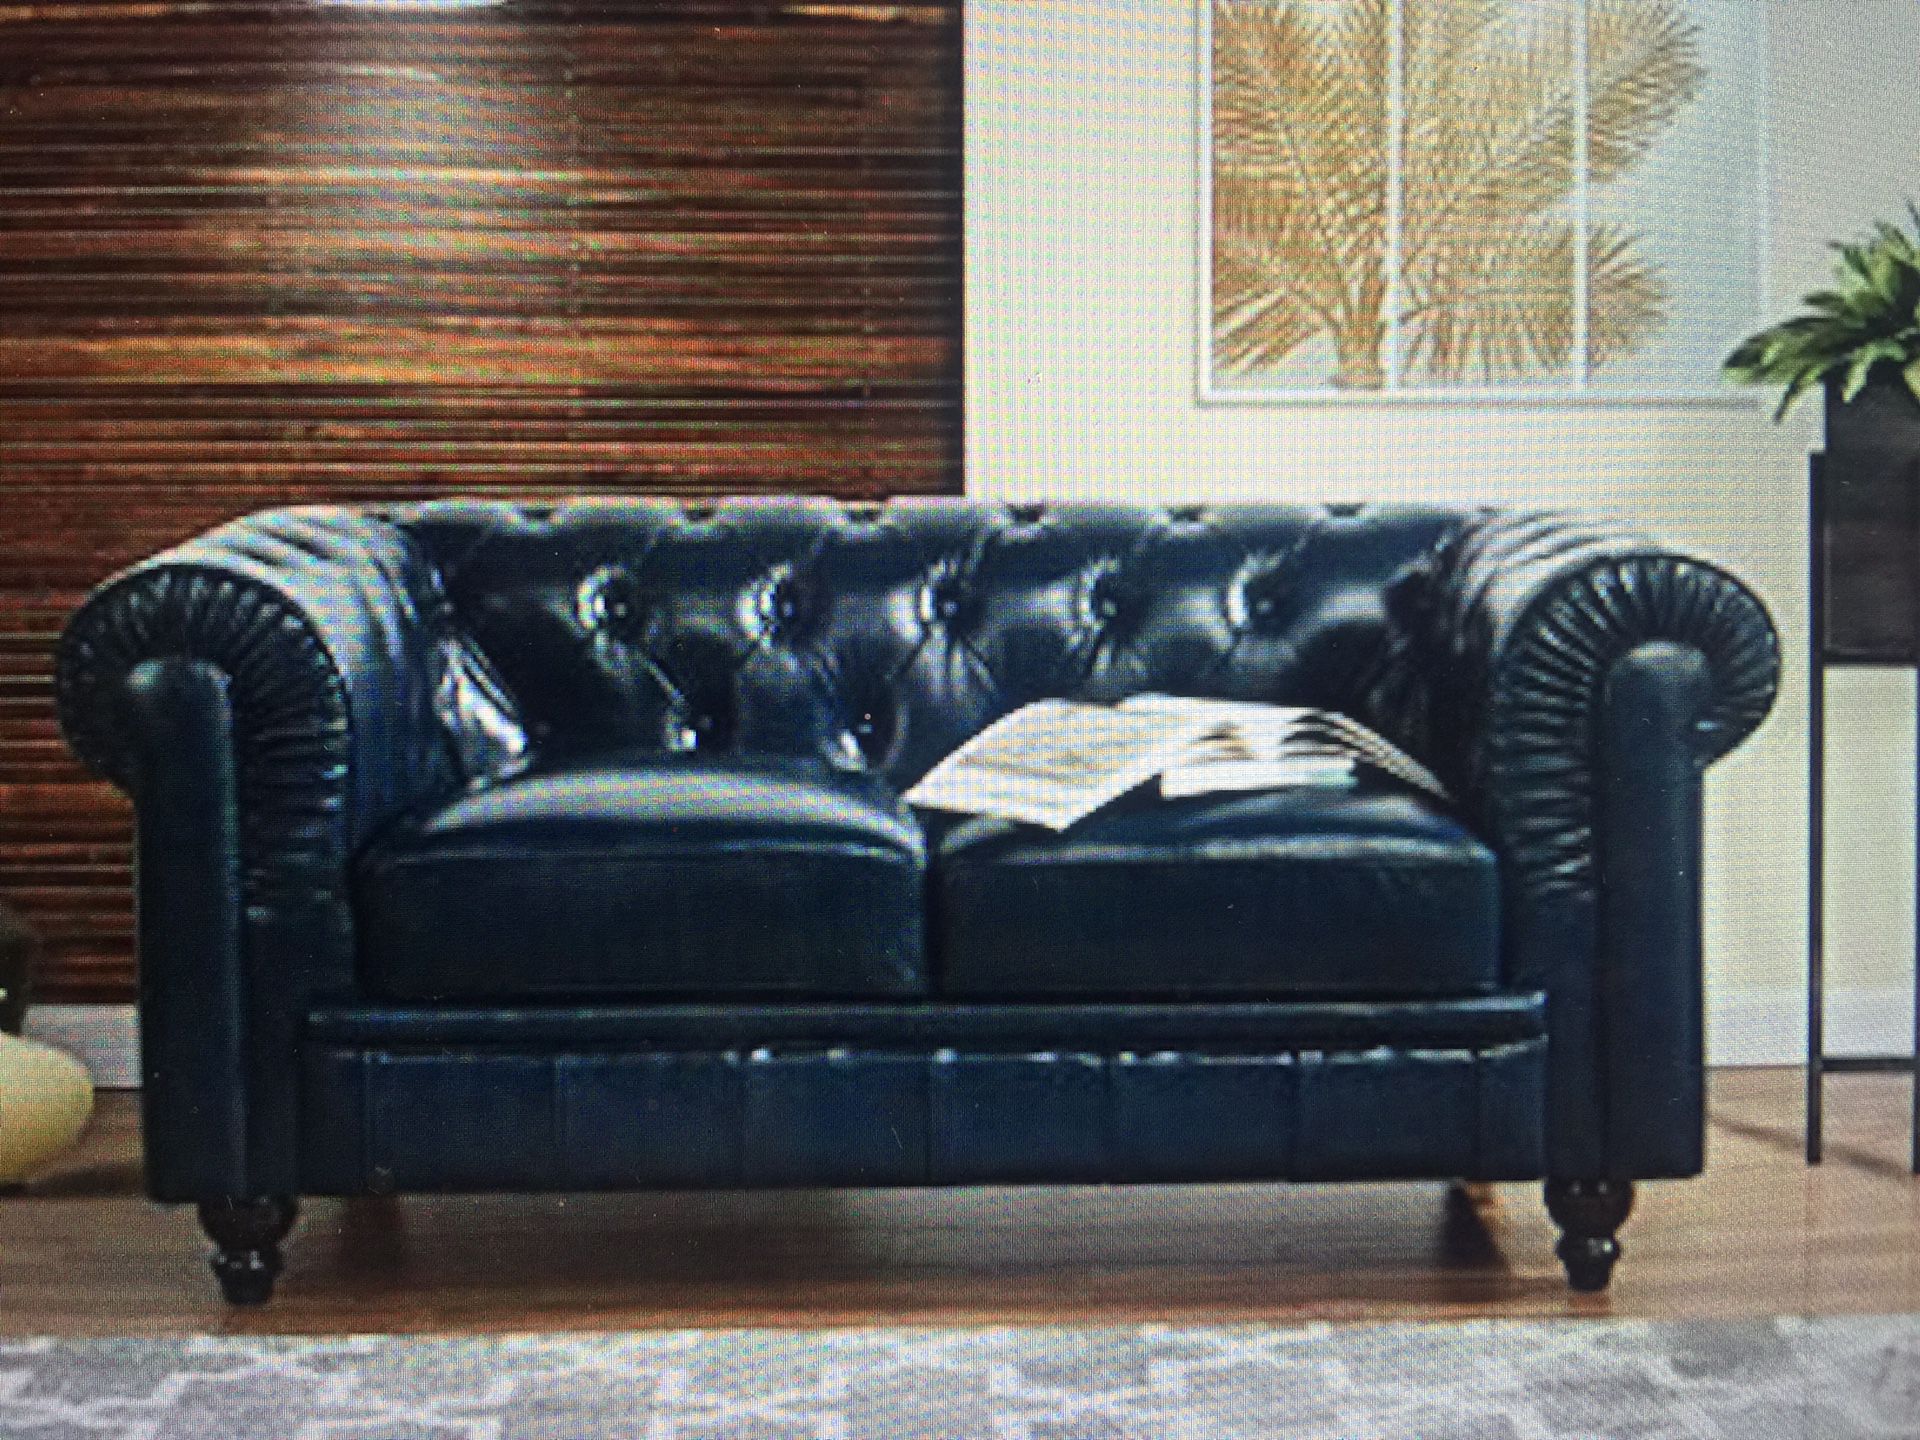 Two matching Chesterfield Loveseat Sofas by Divano Roma